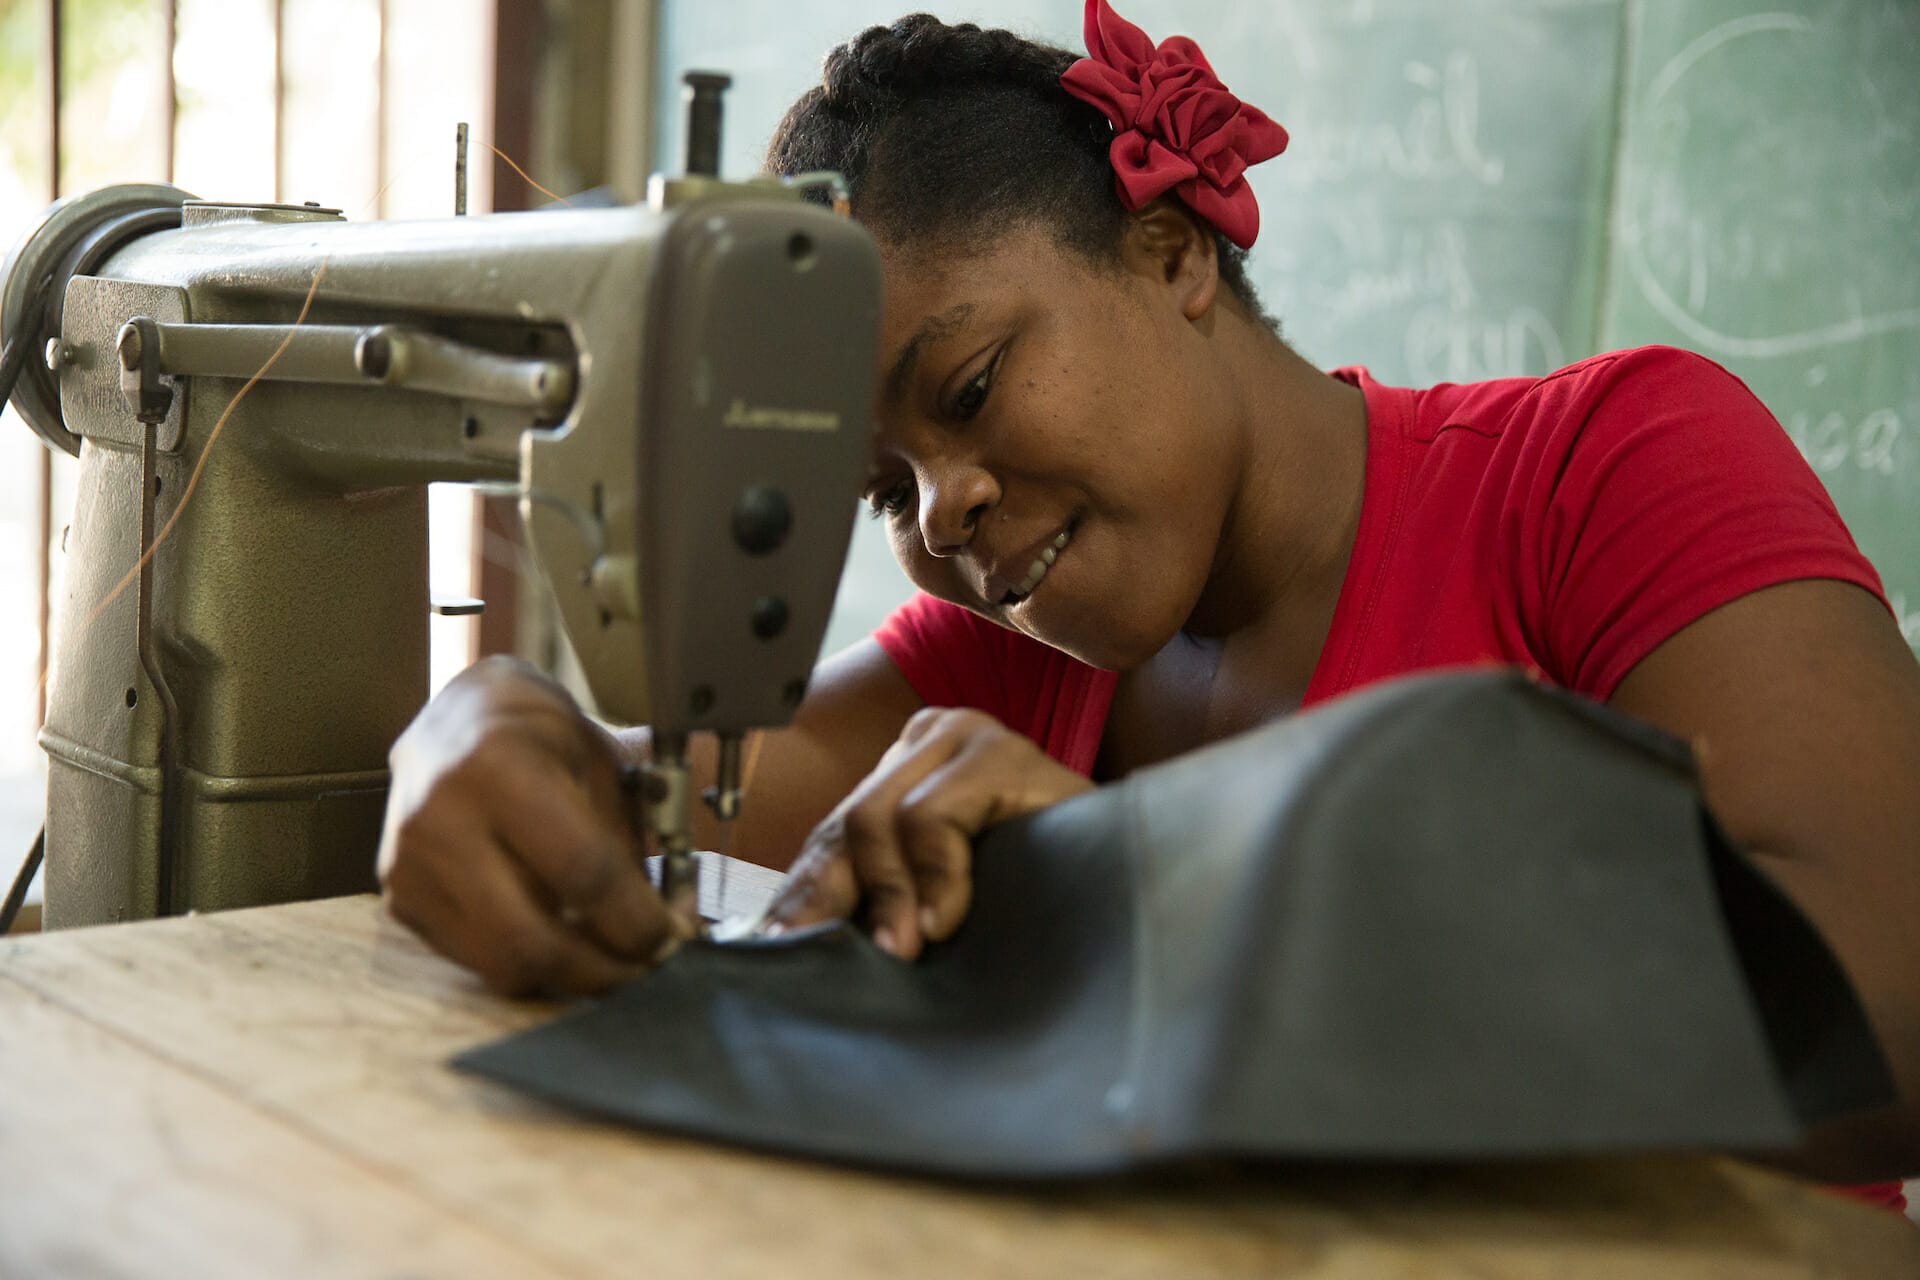 A woman stitches leather gifts from Haiti at a sewing machine